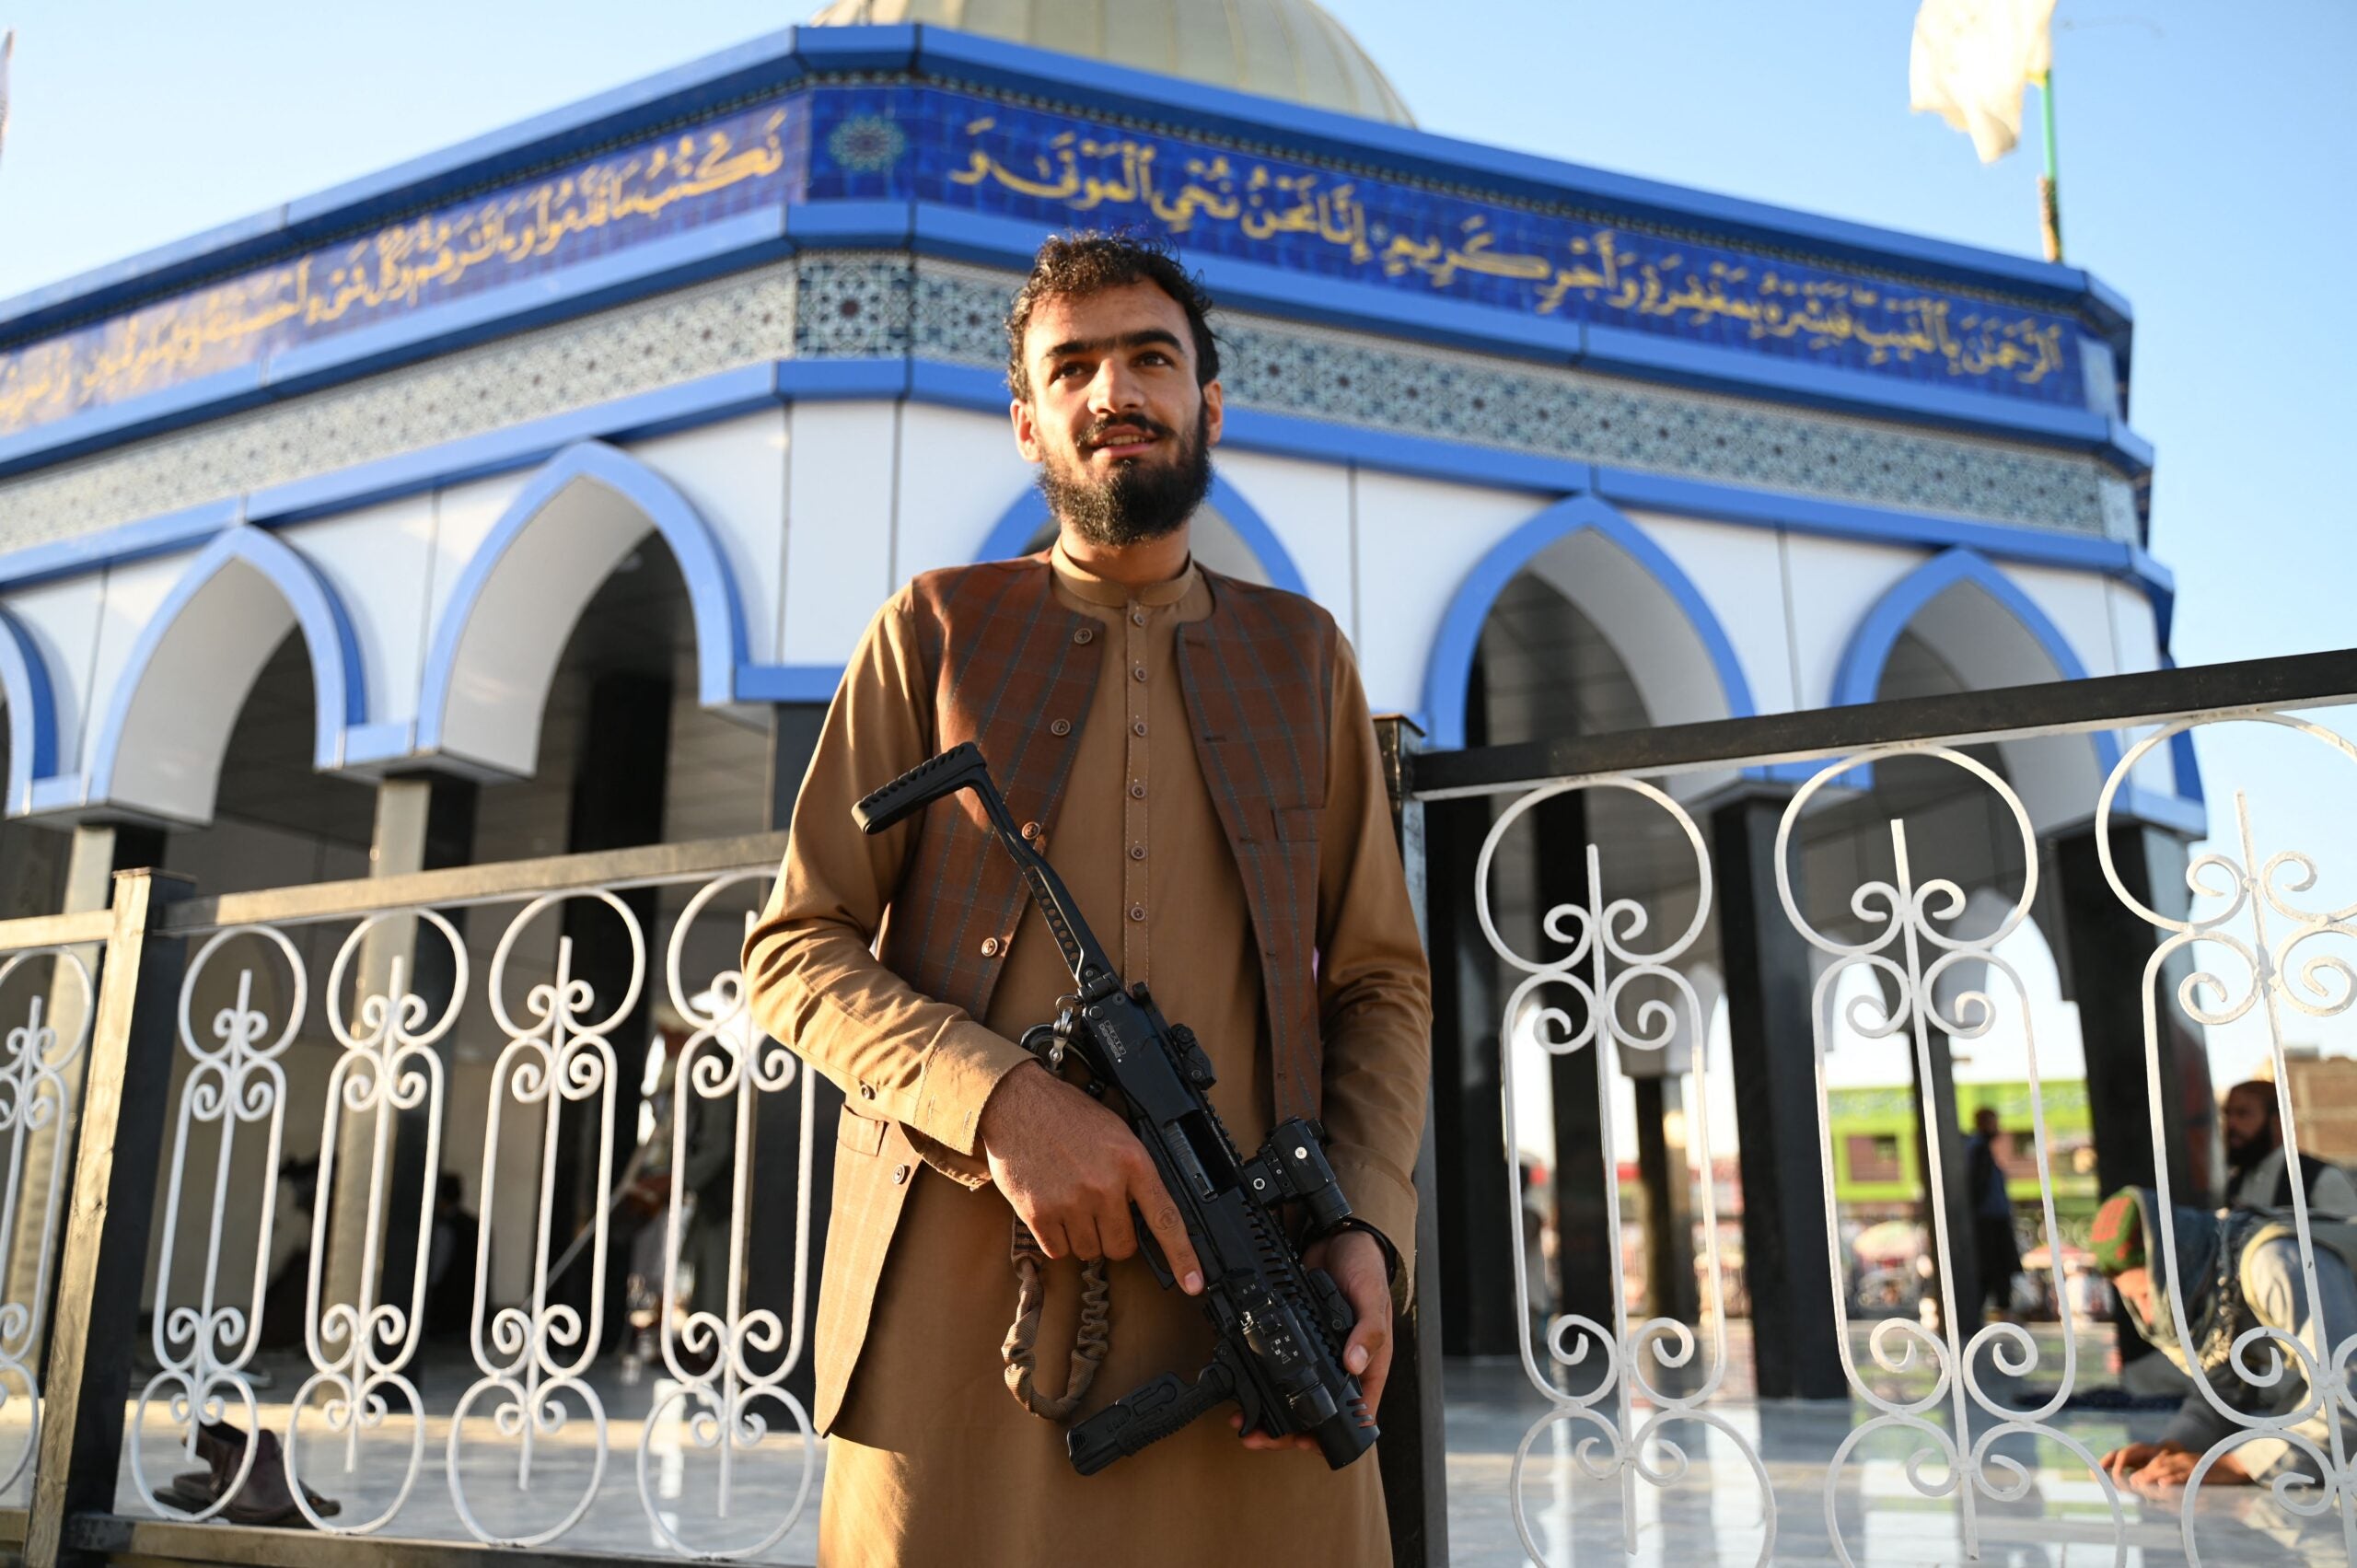 A Taliban fighter poses in front of a replica of Al-Aqsa Mosque at Kampani Square on the outskirts of Kabul on May 23, 2022. (Photo by Wakil KOHSAR / AFP) (Photo by WAKIL KOHSAR/AFP via Getty Images)